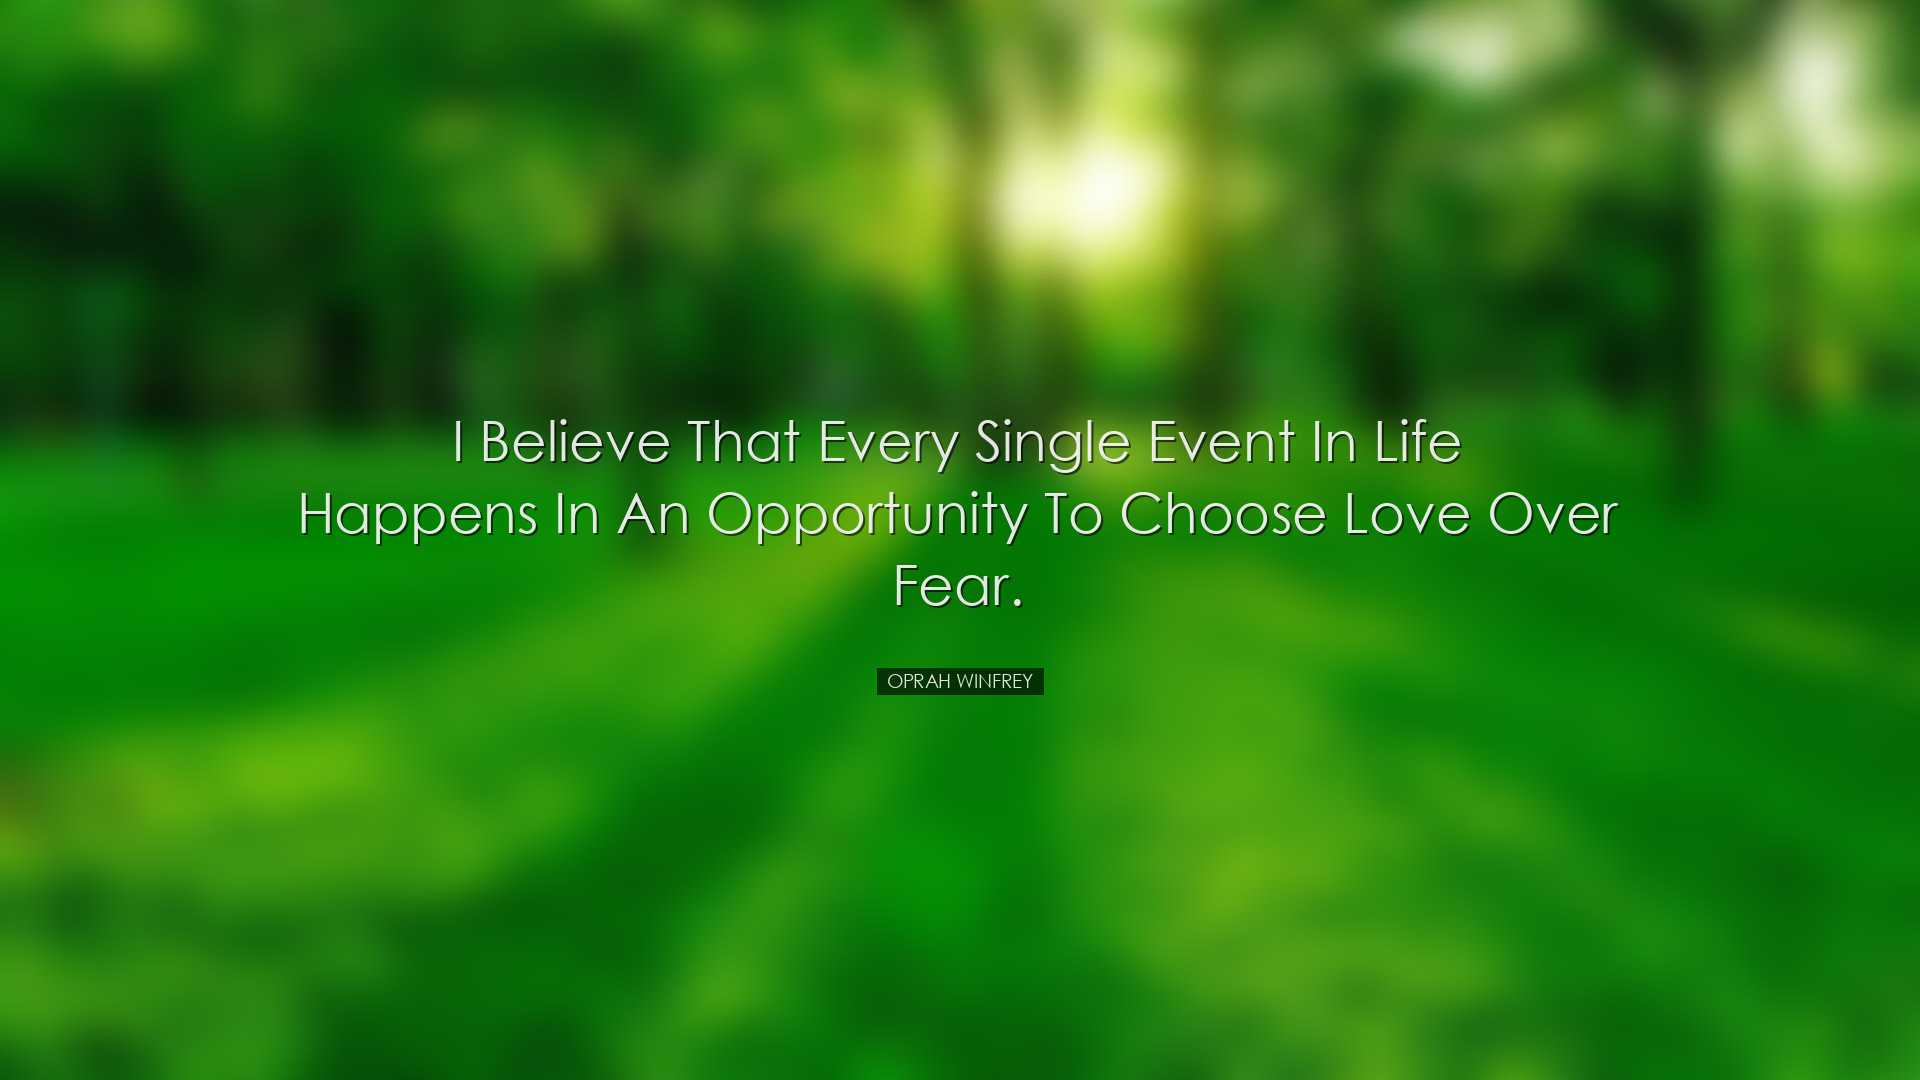 I believe that every single event in life happens in an opportunit